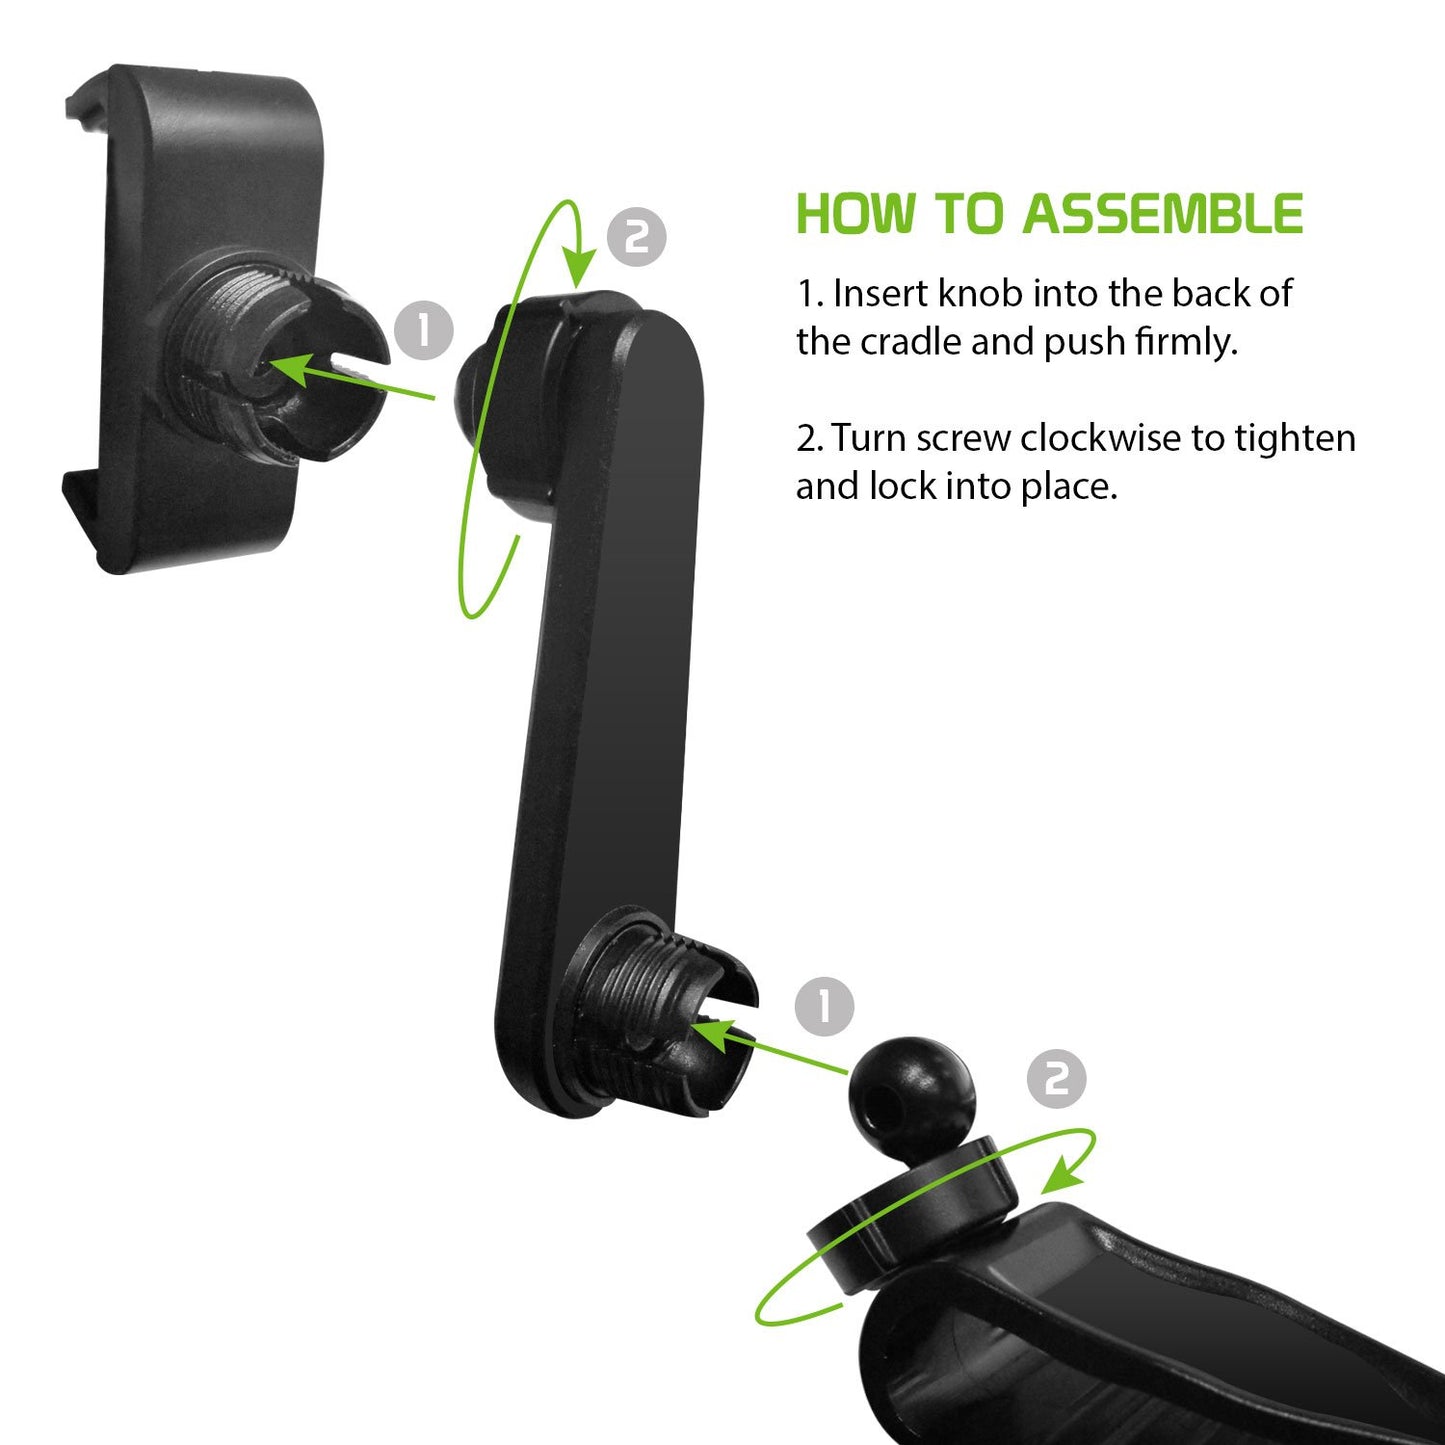 PH710 - Sun Visor Phone Mount, Sun Visor Clip Phone Mount Holder with 360 Degree Rotation Compatible to all Smartphones